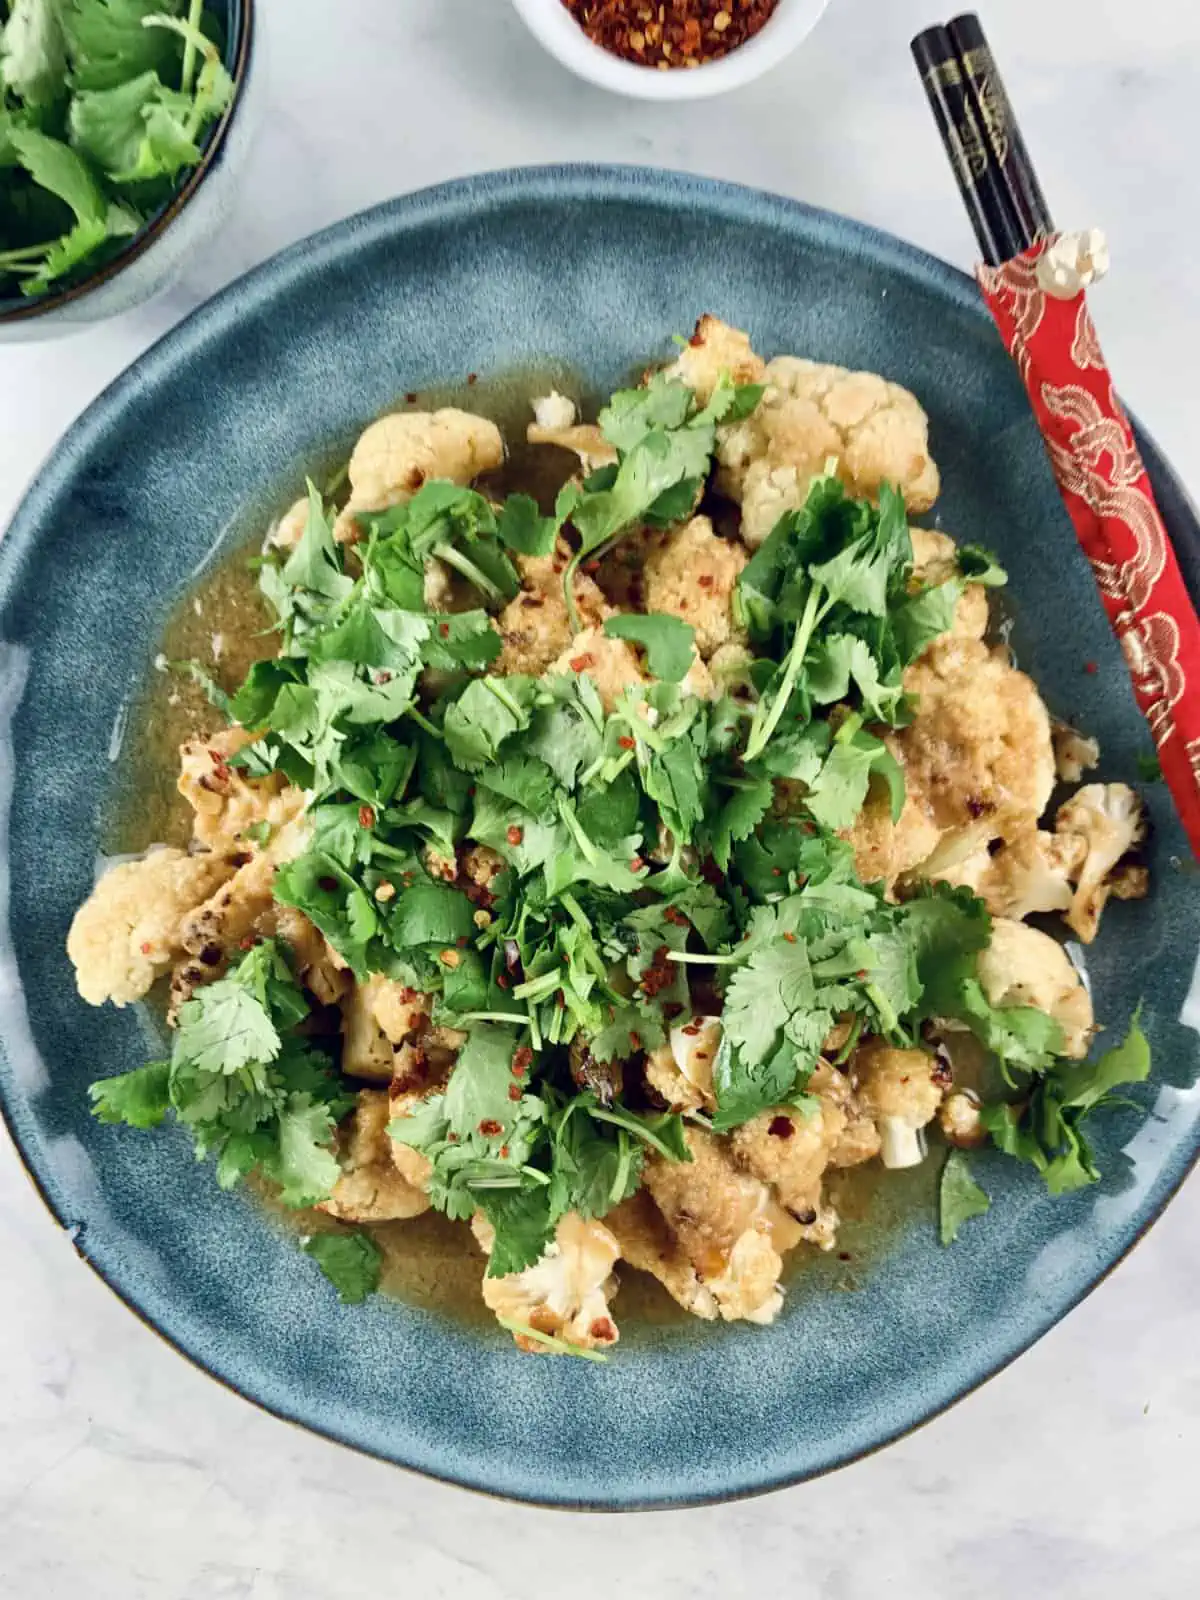 Miso cauliflower in blue bowl with chopsticks, chilli flakes and coriander on the side.